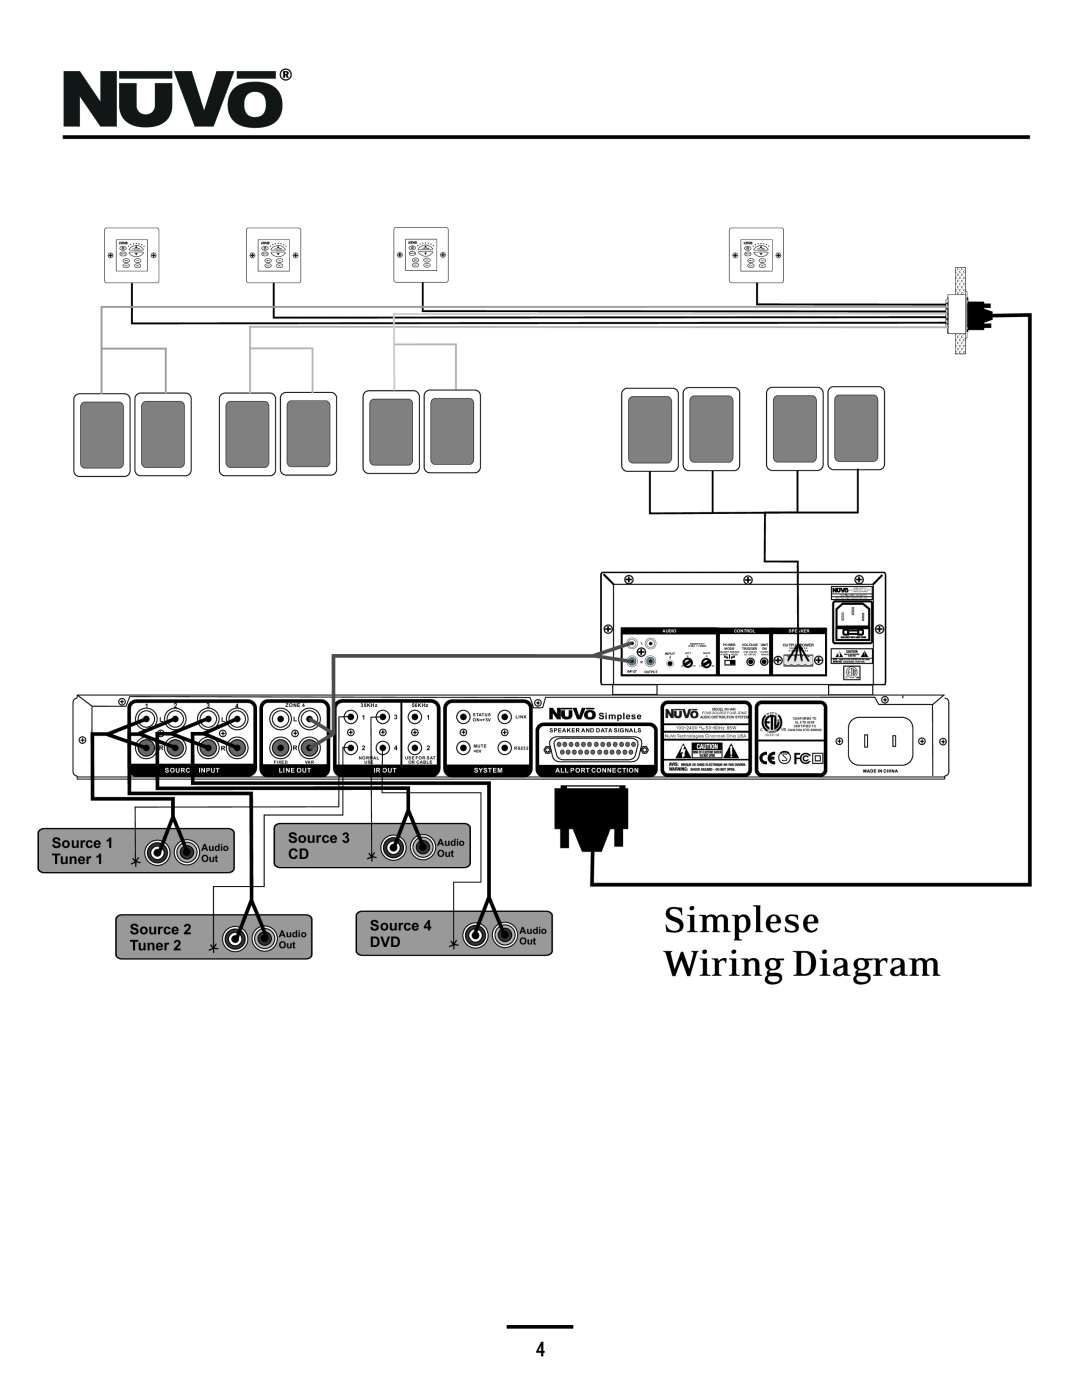 Nuvo NV-A4DS-UK Simplese Wiring Diagram, Tuner, Audio, Source Input, Line Out, Ir Out, System, All Port Connection 